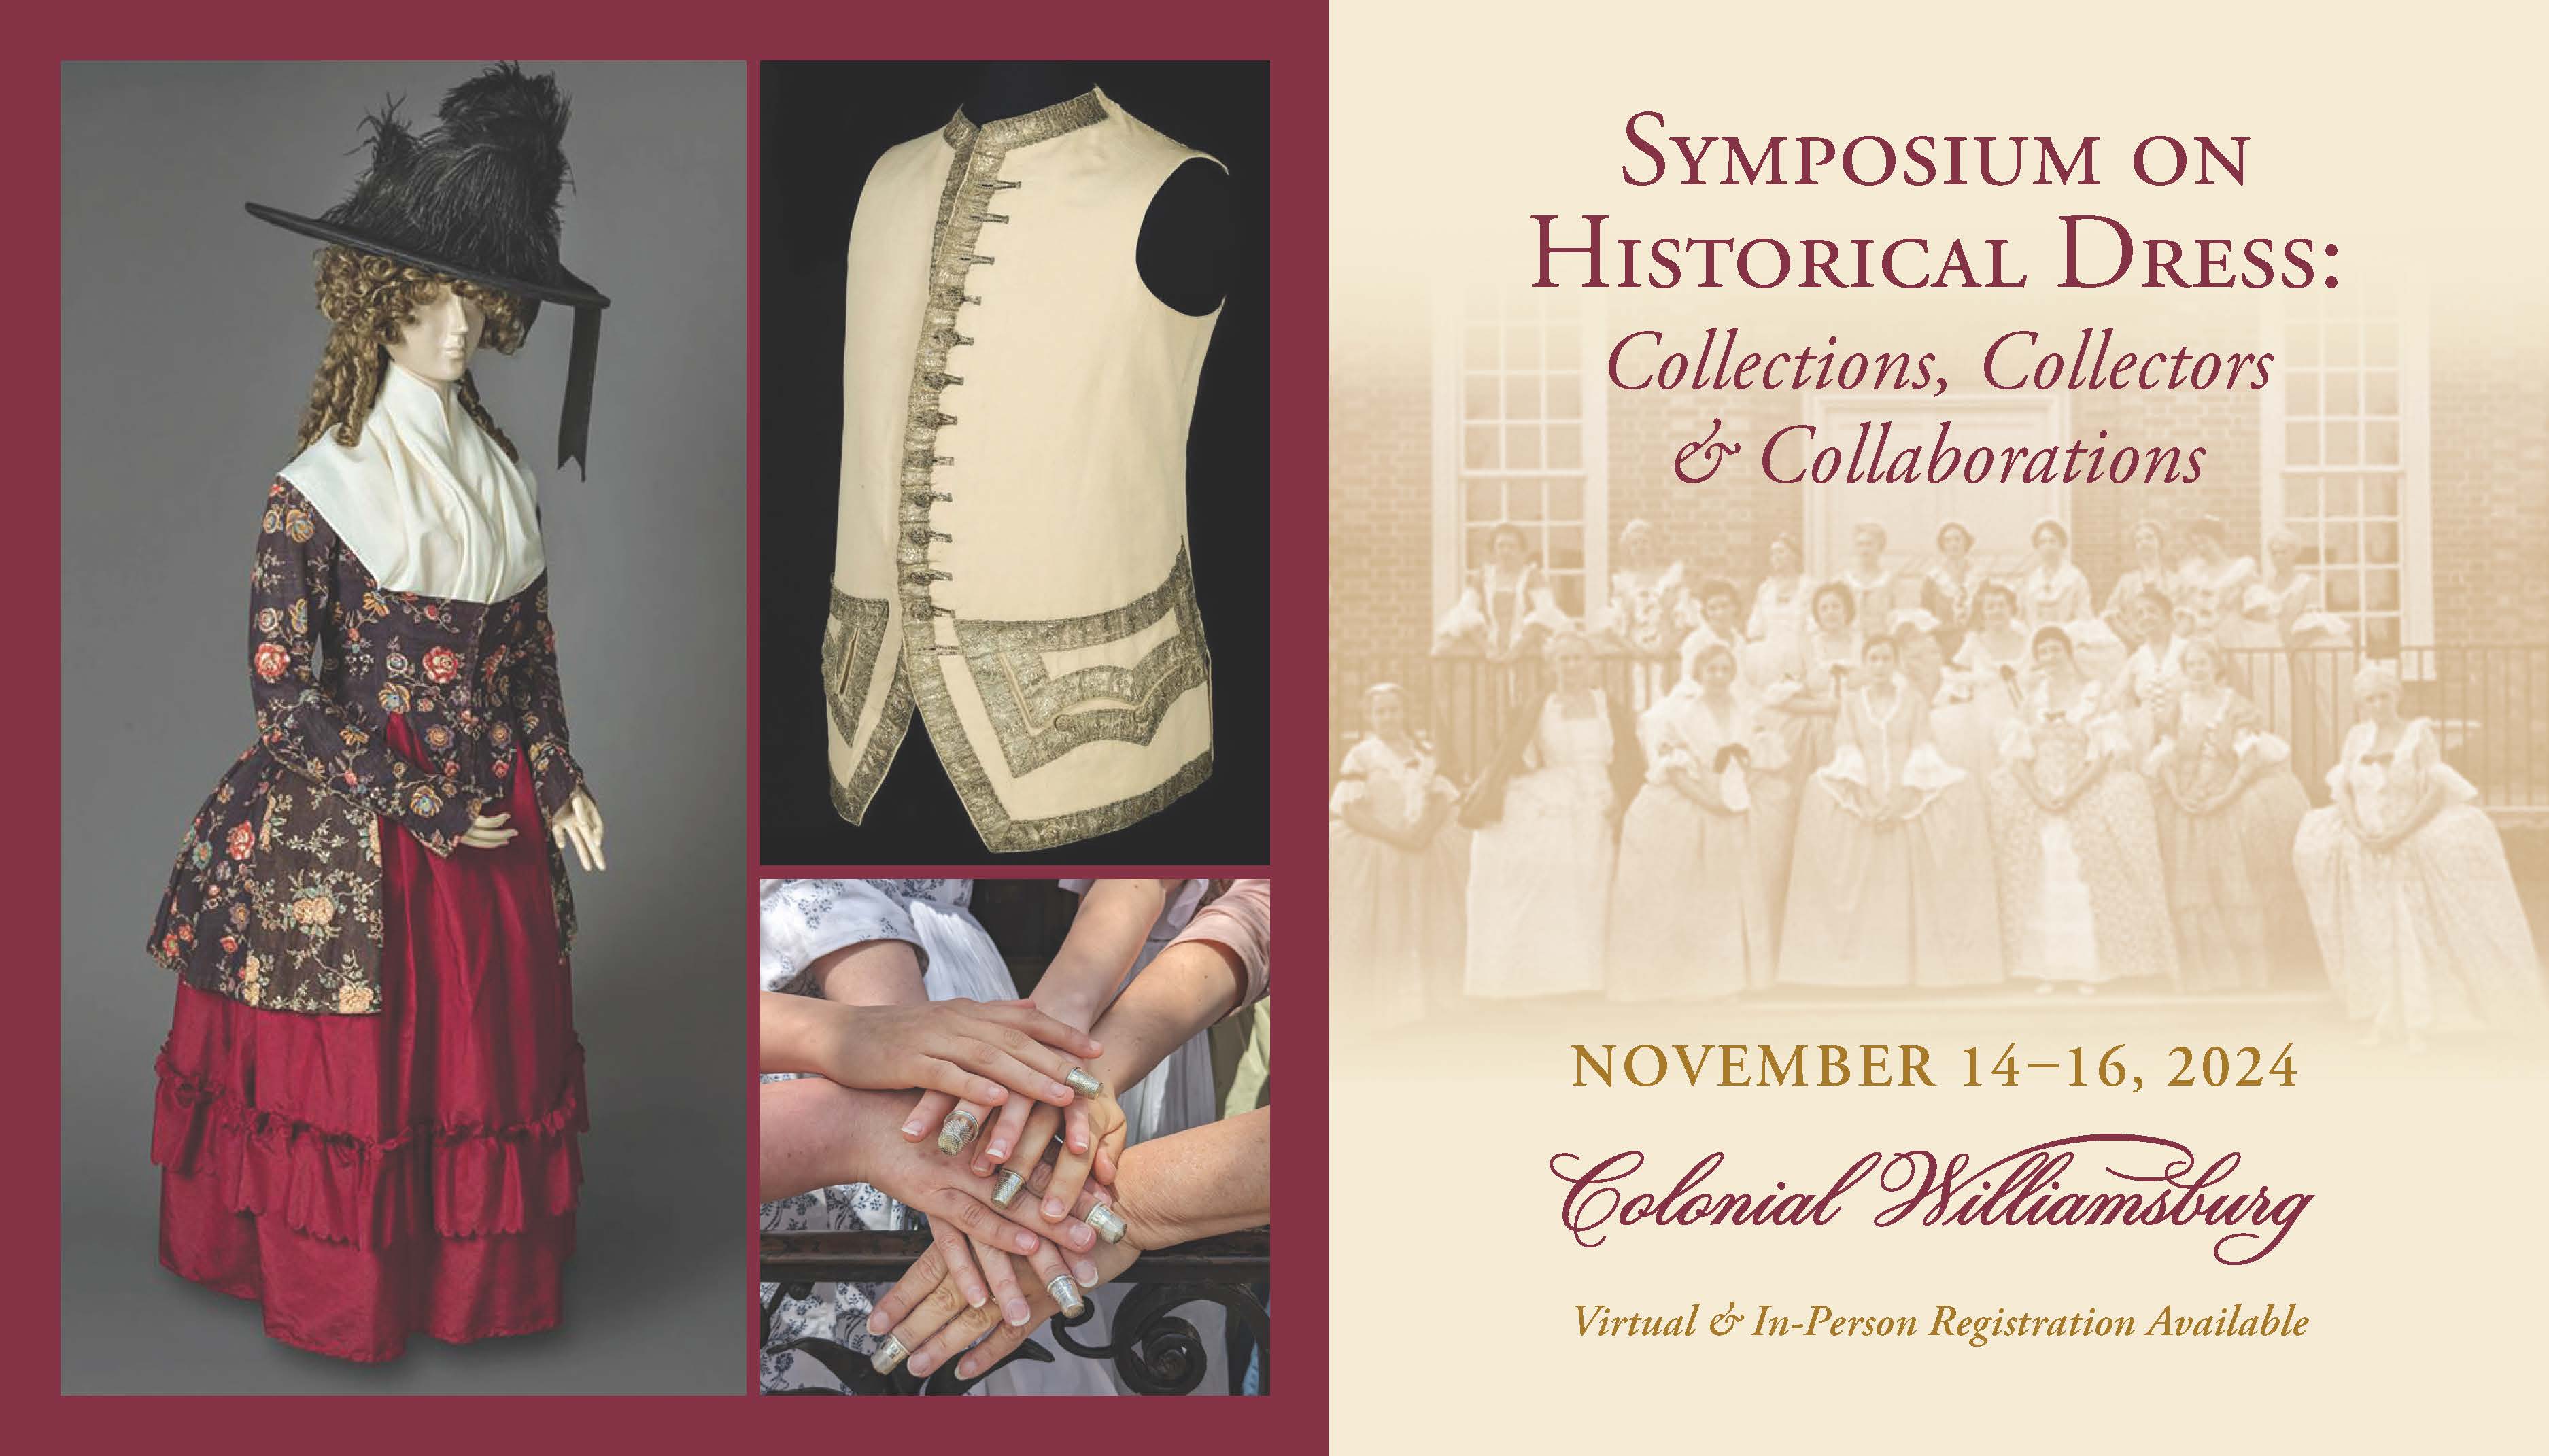 Symposium on Historical Dress: Collections, Collectors and Collaborations